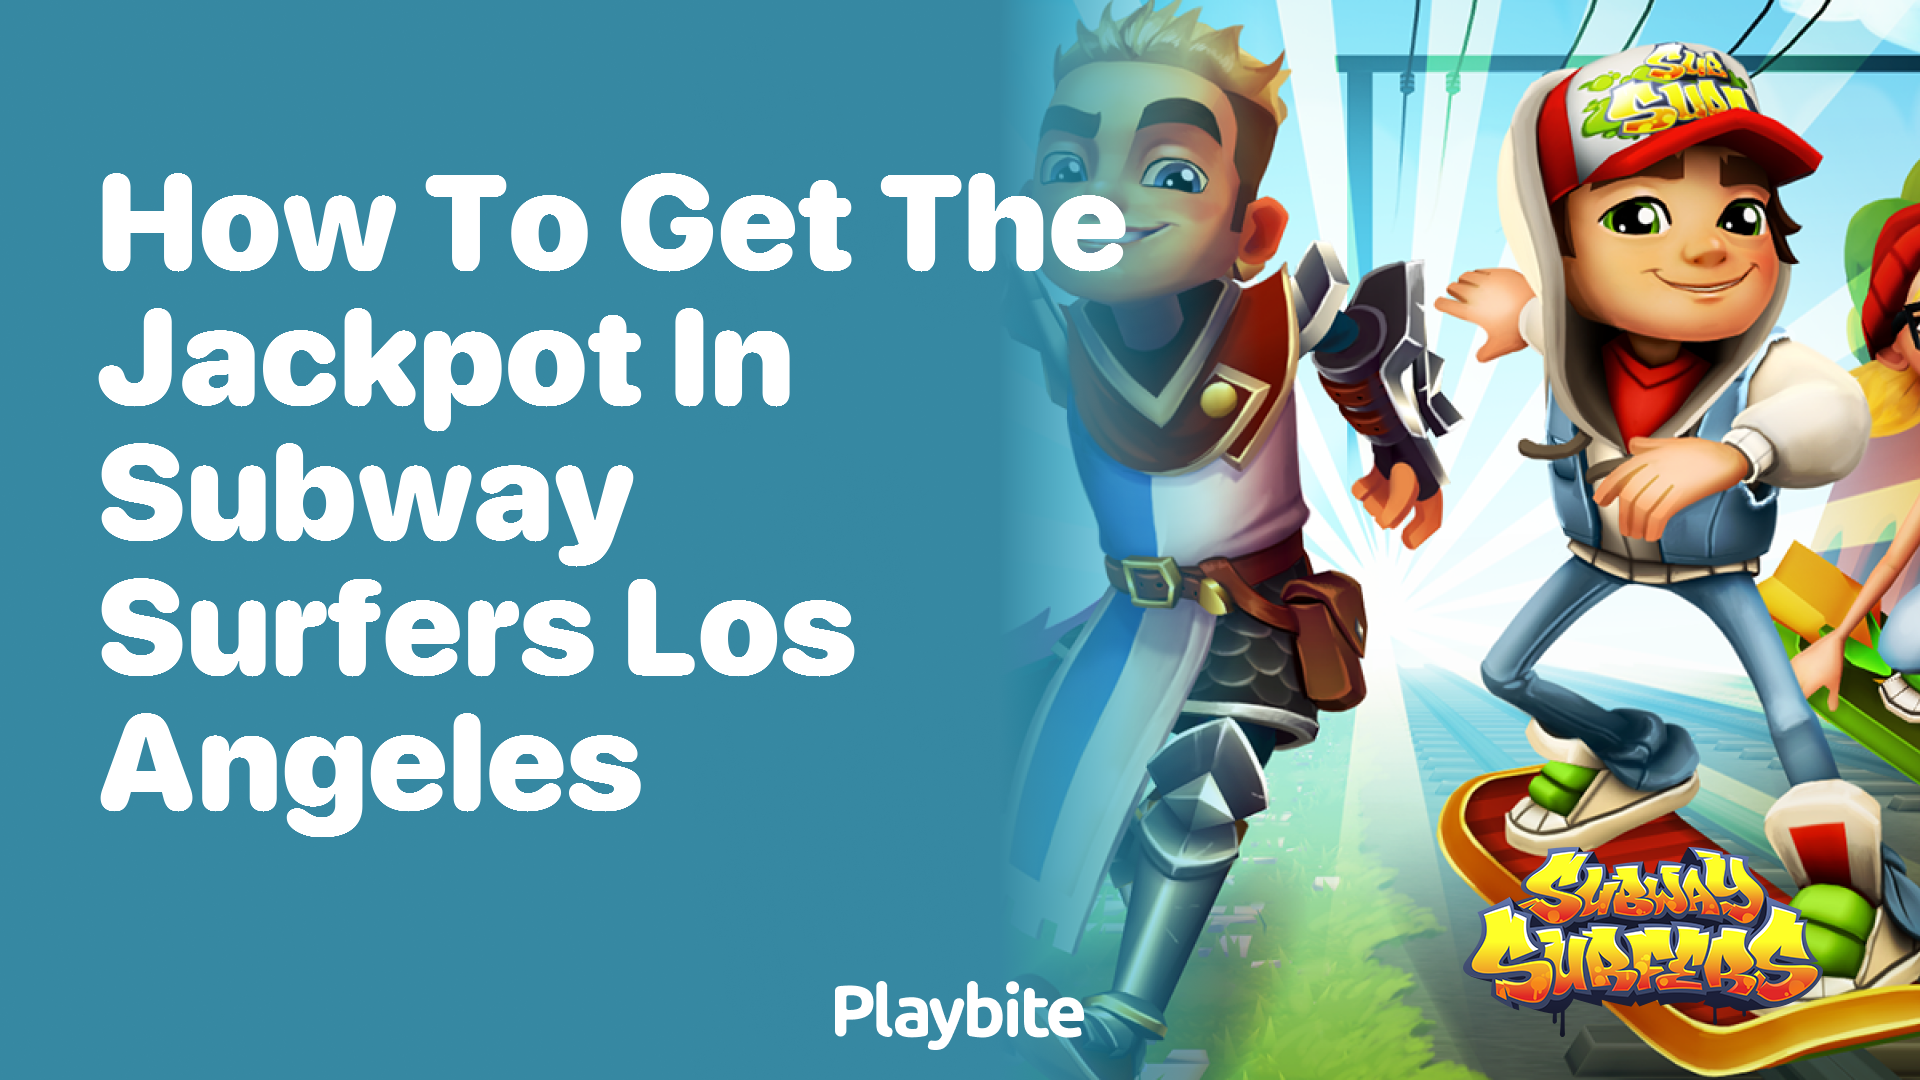 How to get the jackpot in Subway Surfers Los Angeles?